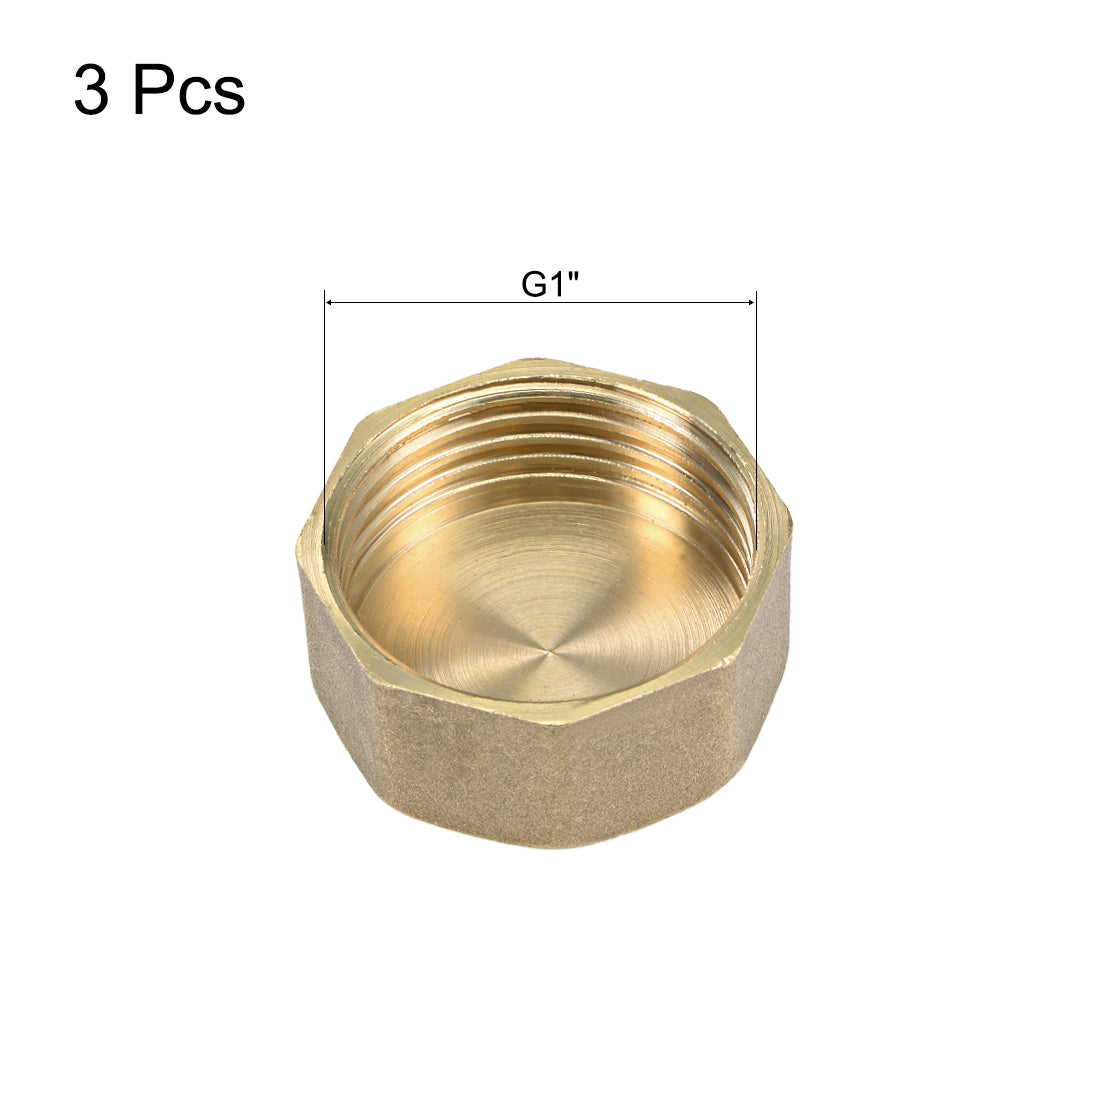 uxcell Uxcell 1-Inch Brass Cap 3pcs G1 Female Pipe Fitting Hex Compression Stop Valve Connector